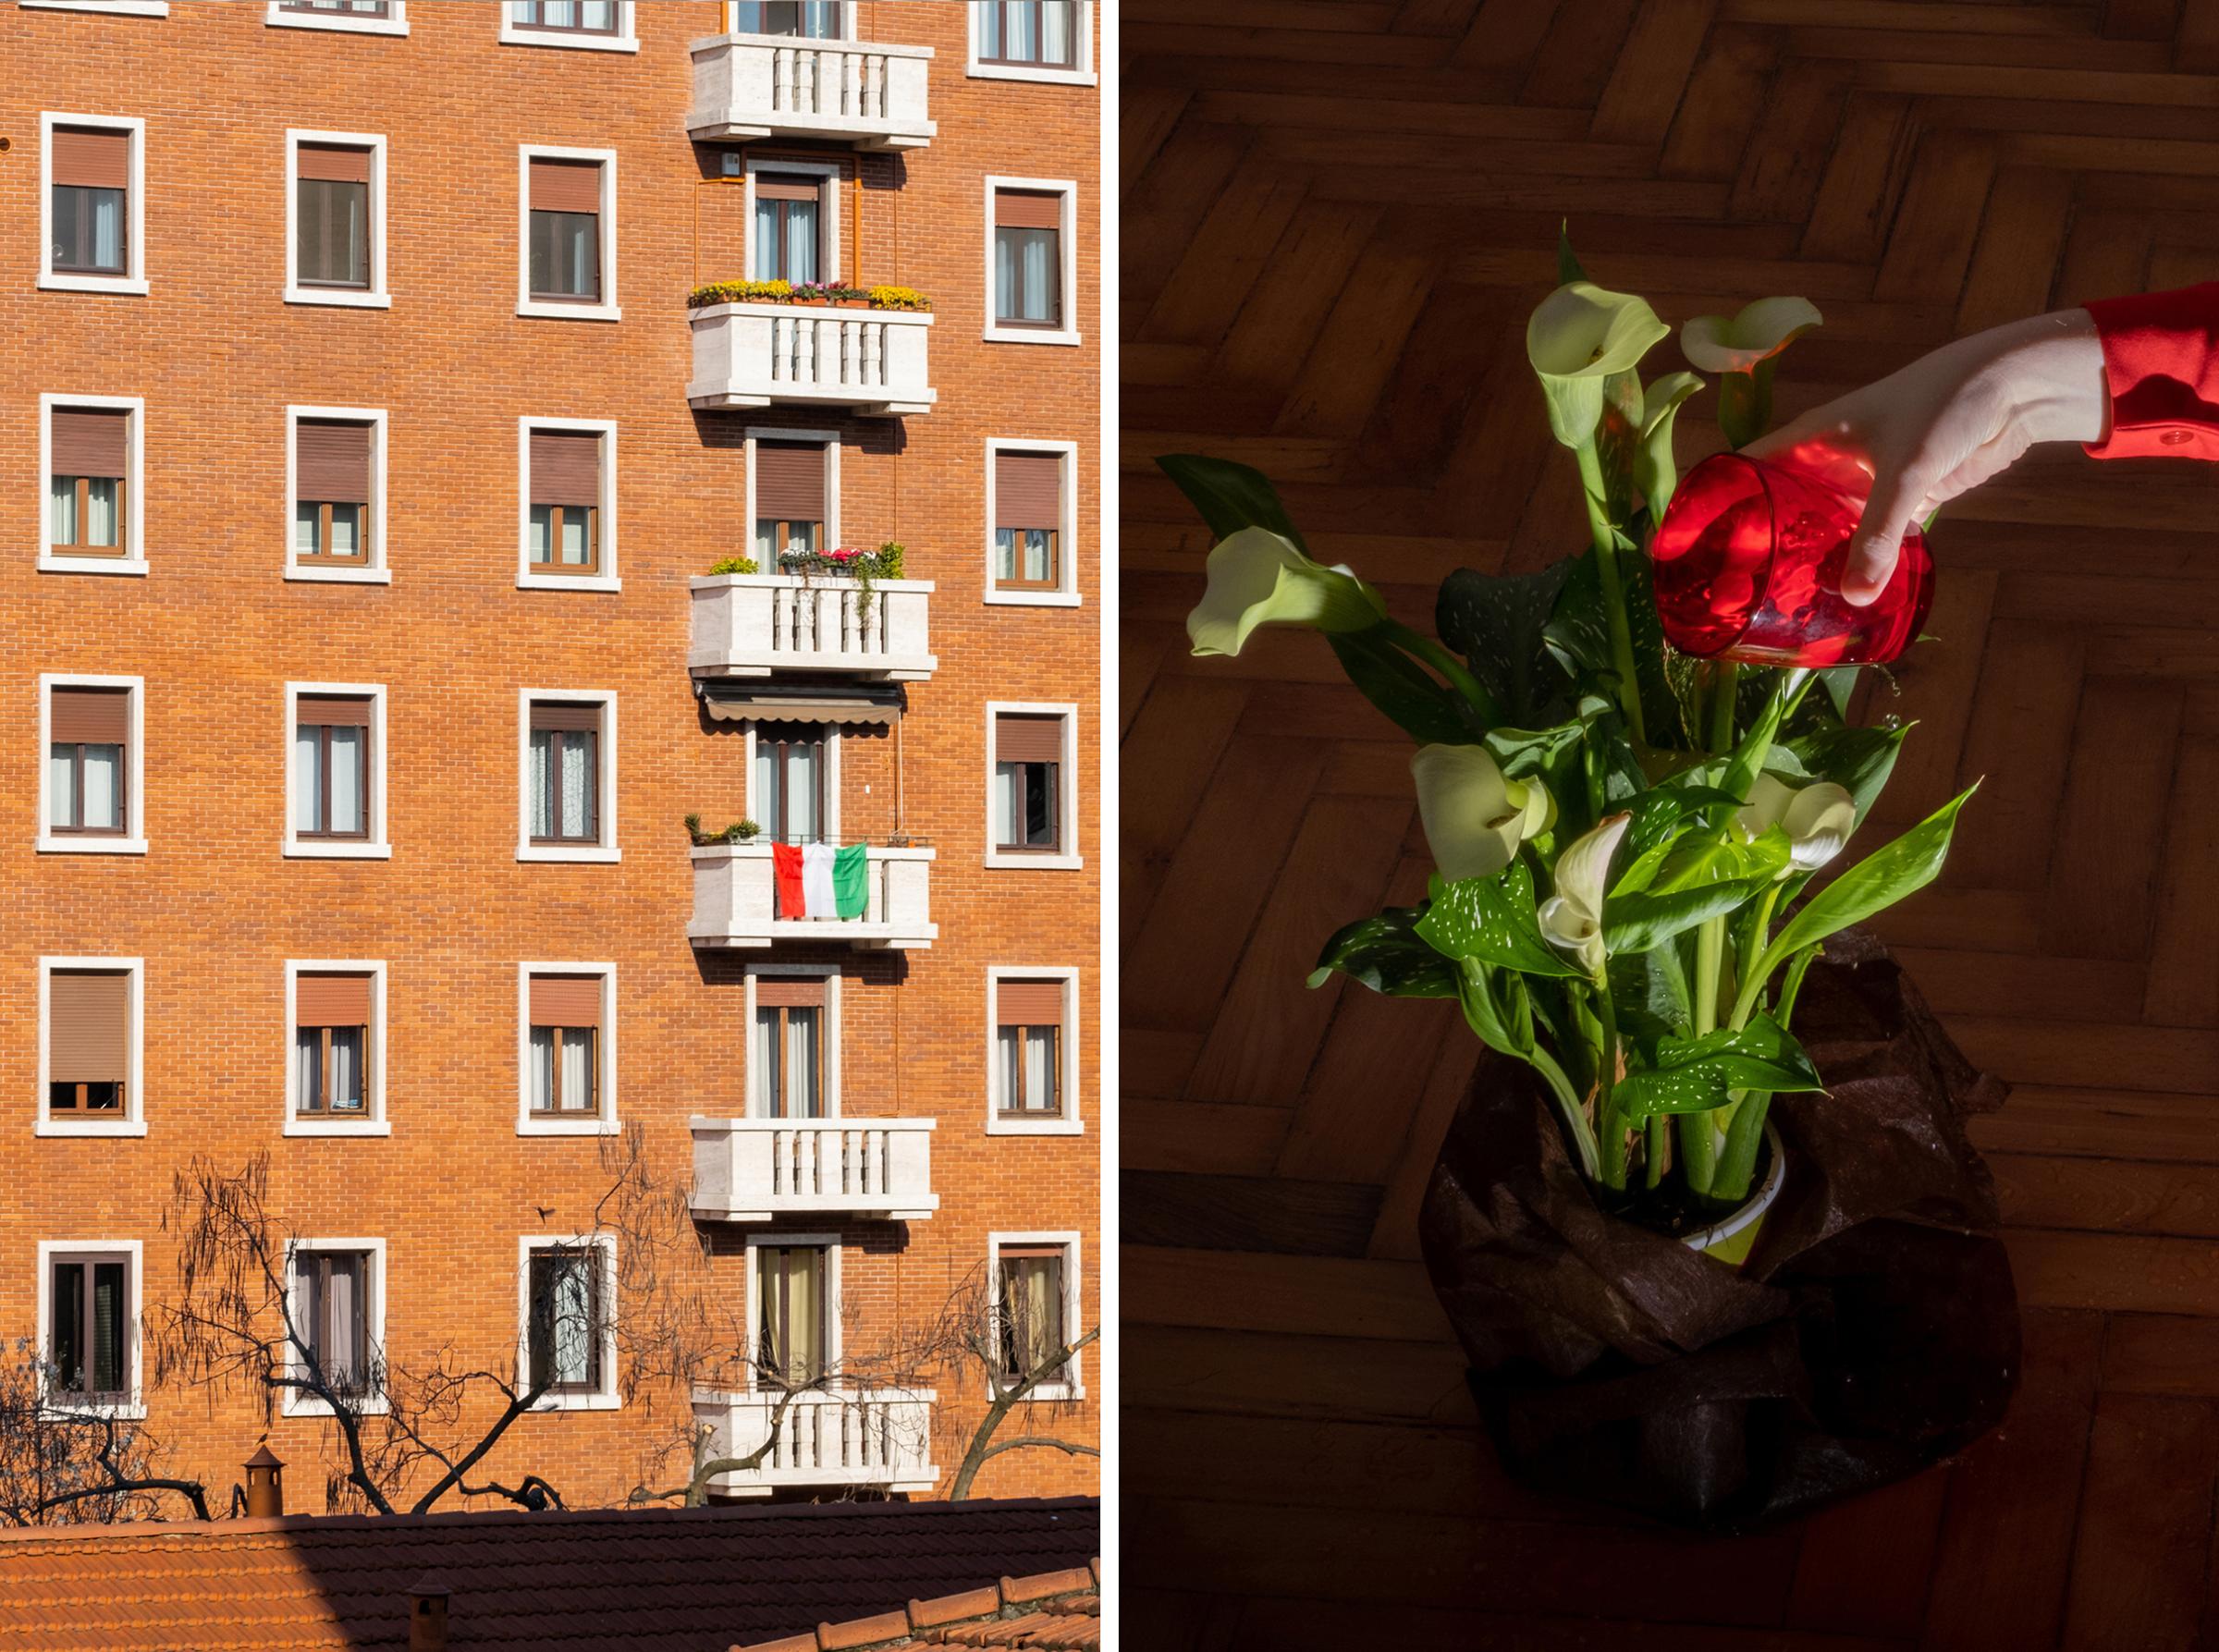 Left: 3.50 pm view from the balcony. Right: 3.40 pm taking care of the plant